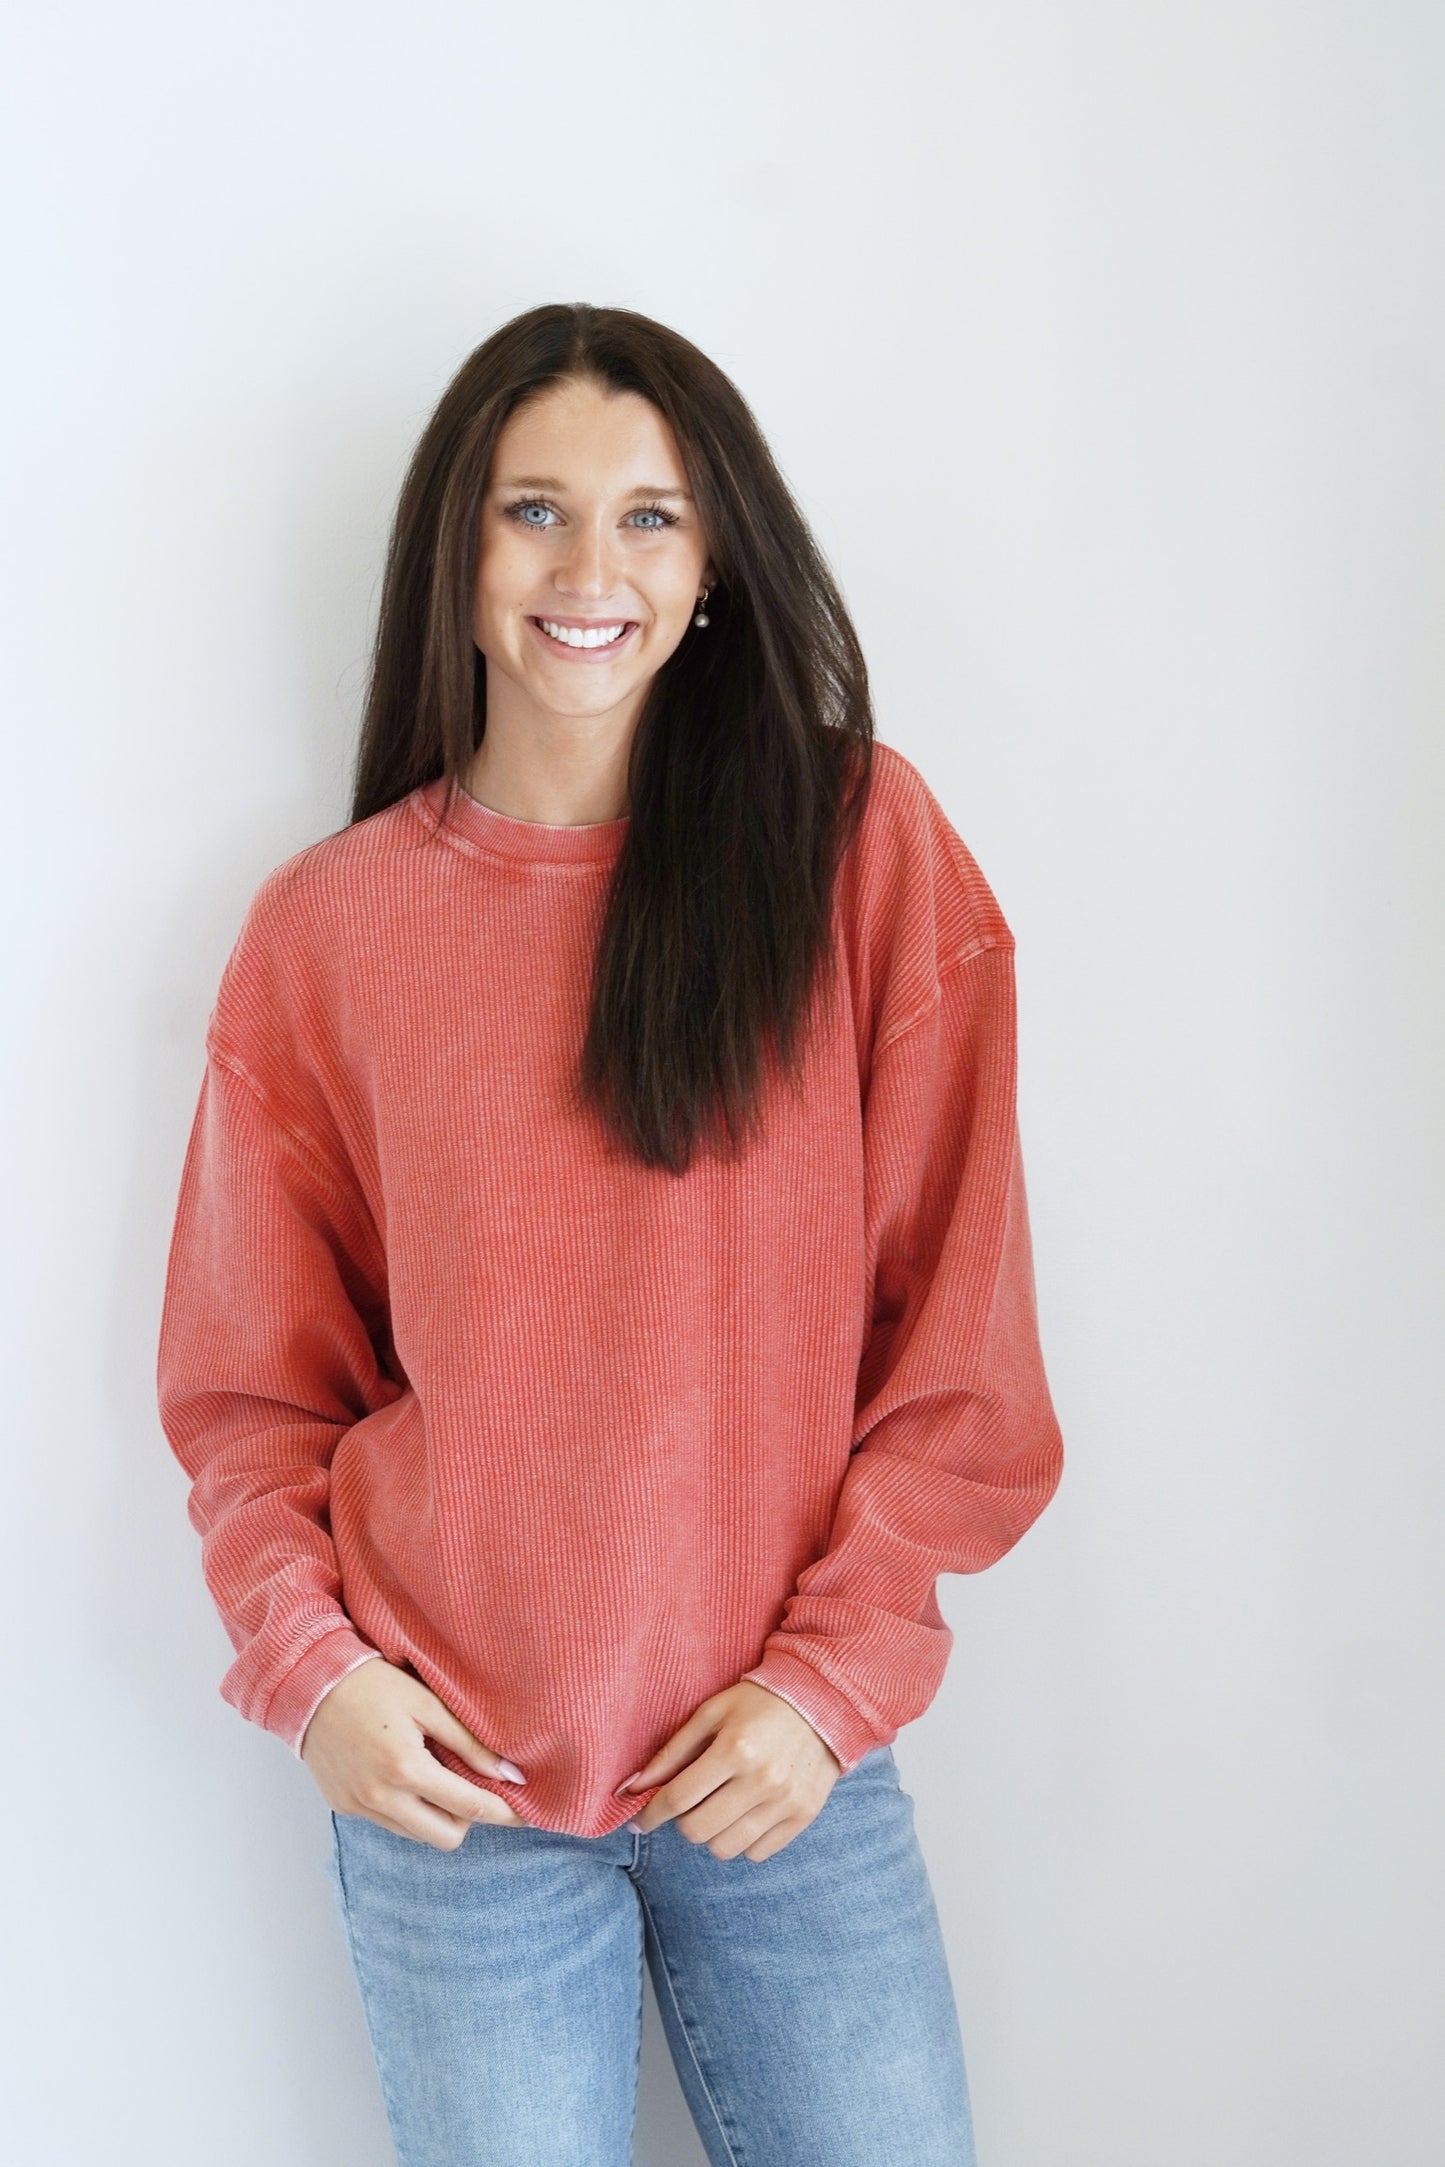 Calla Corded Crew Everyday Sweatshirt Crew Neckline Long Sleeve Corded Material Colors: Red Full Length Relaxed Fit 100% Cotton